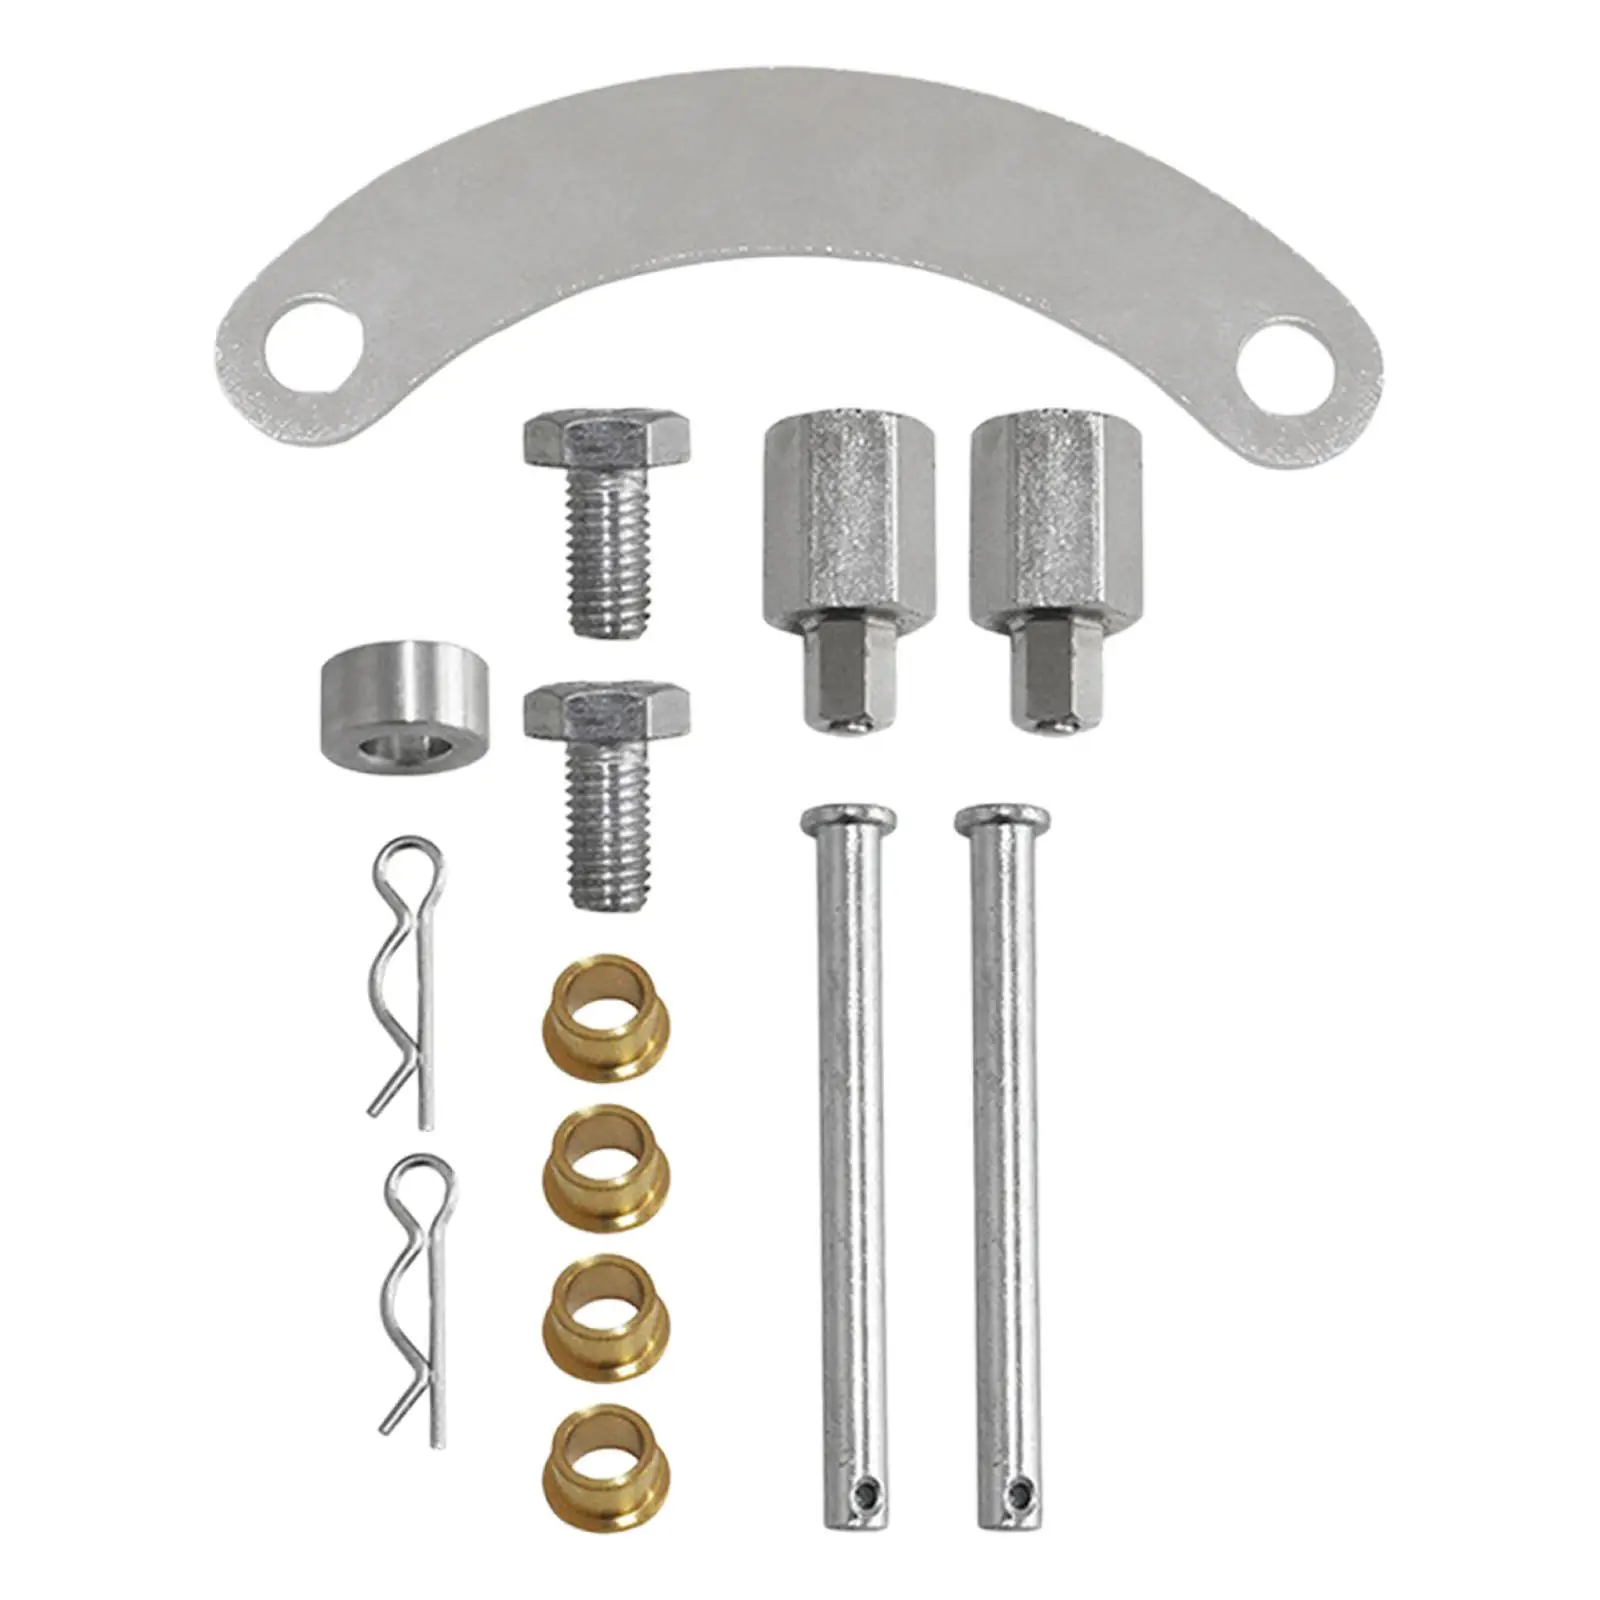 cam Gear Lock Direct Replaces Camlock Tool Accessory Assembly Repair Parts Easy Installation Durable Mounting Hardware